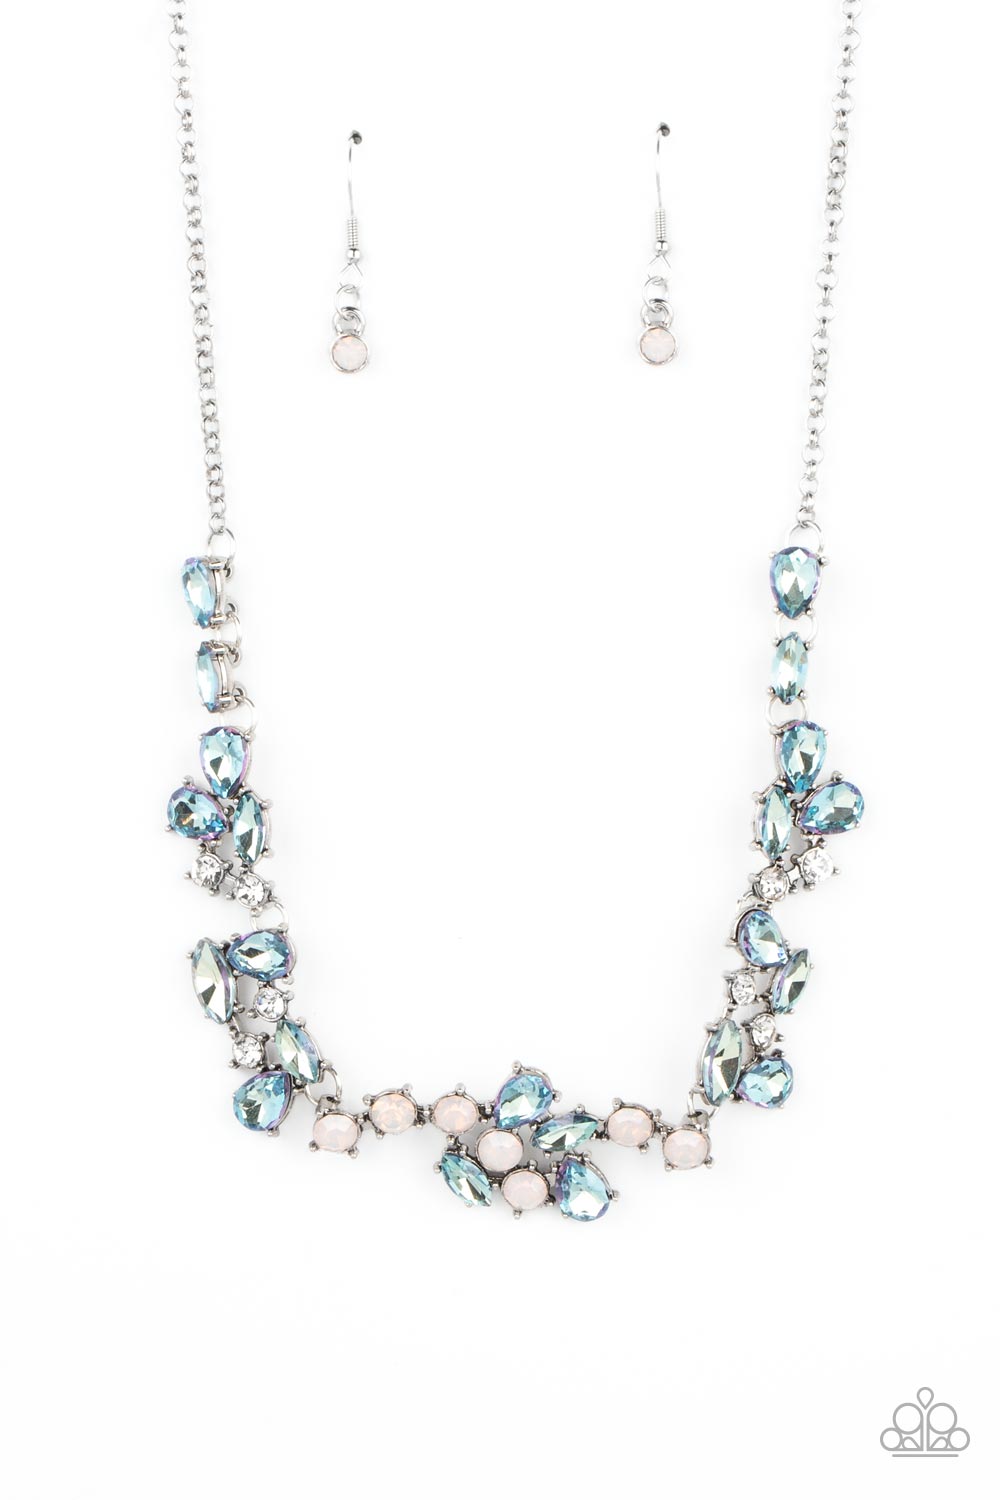 Welcome to the Ice Age - blue - Paparazzi necklace